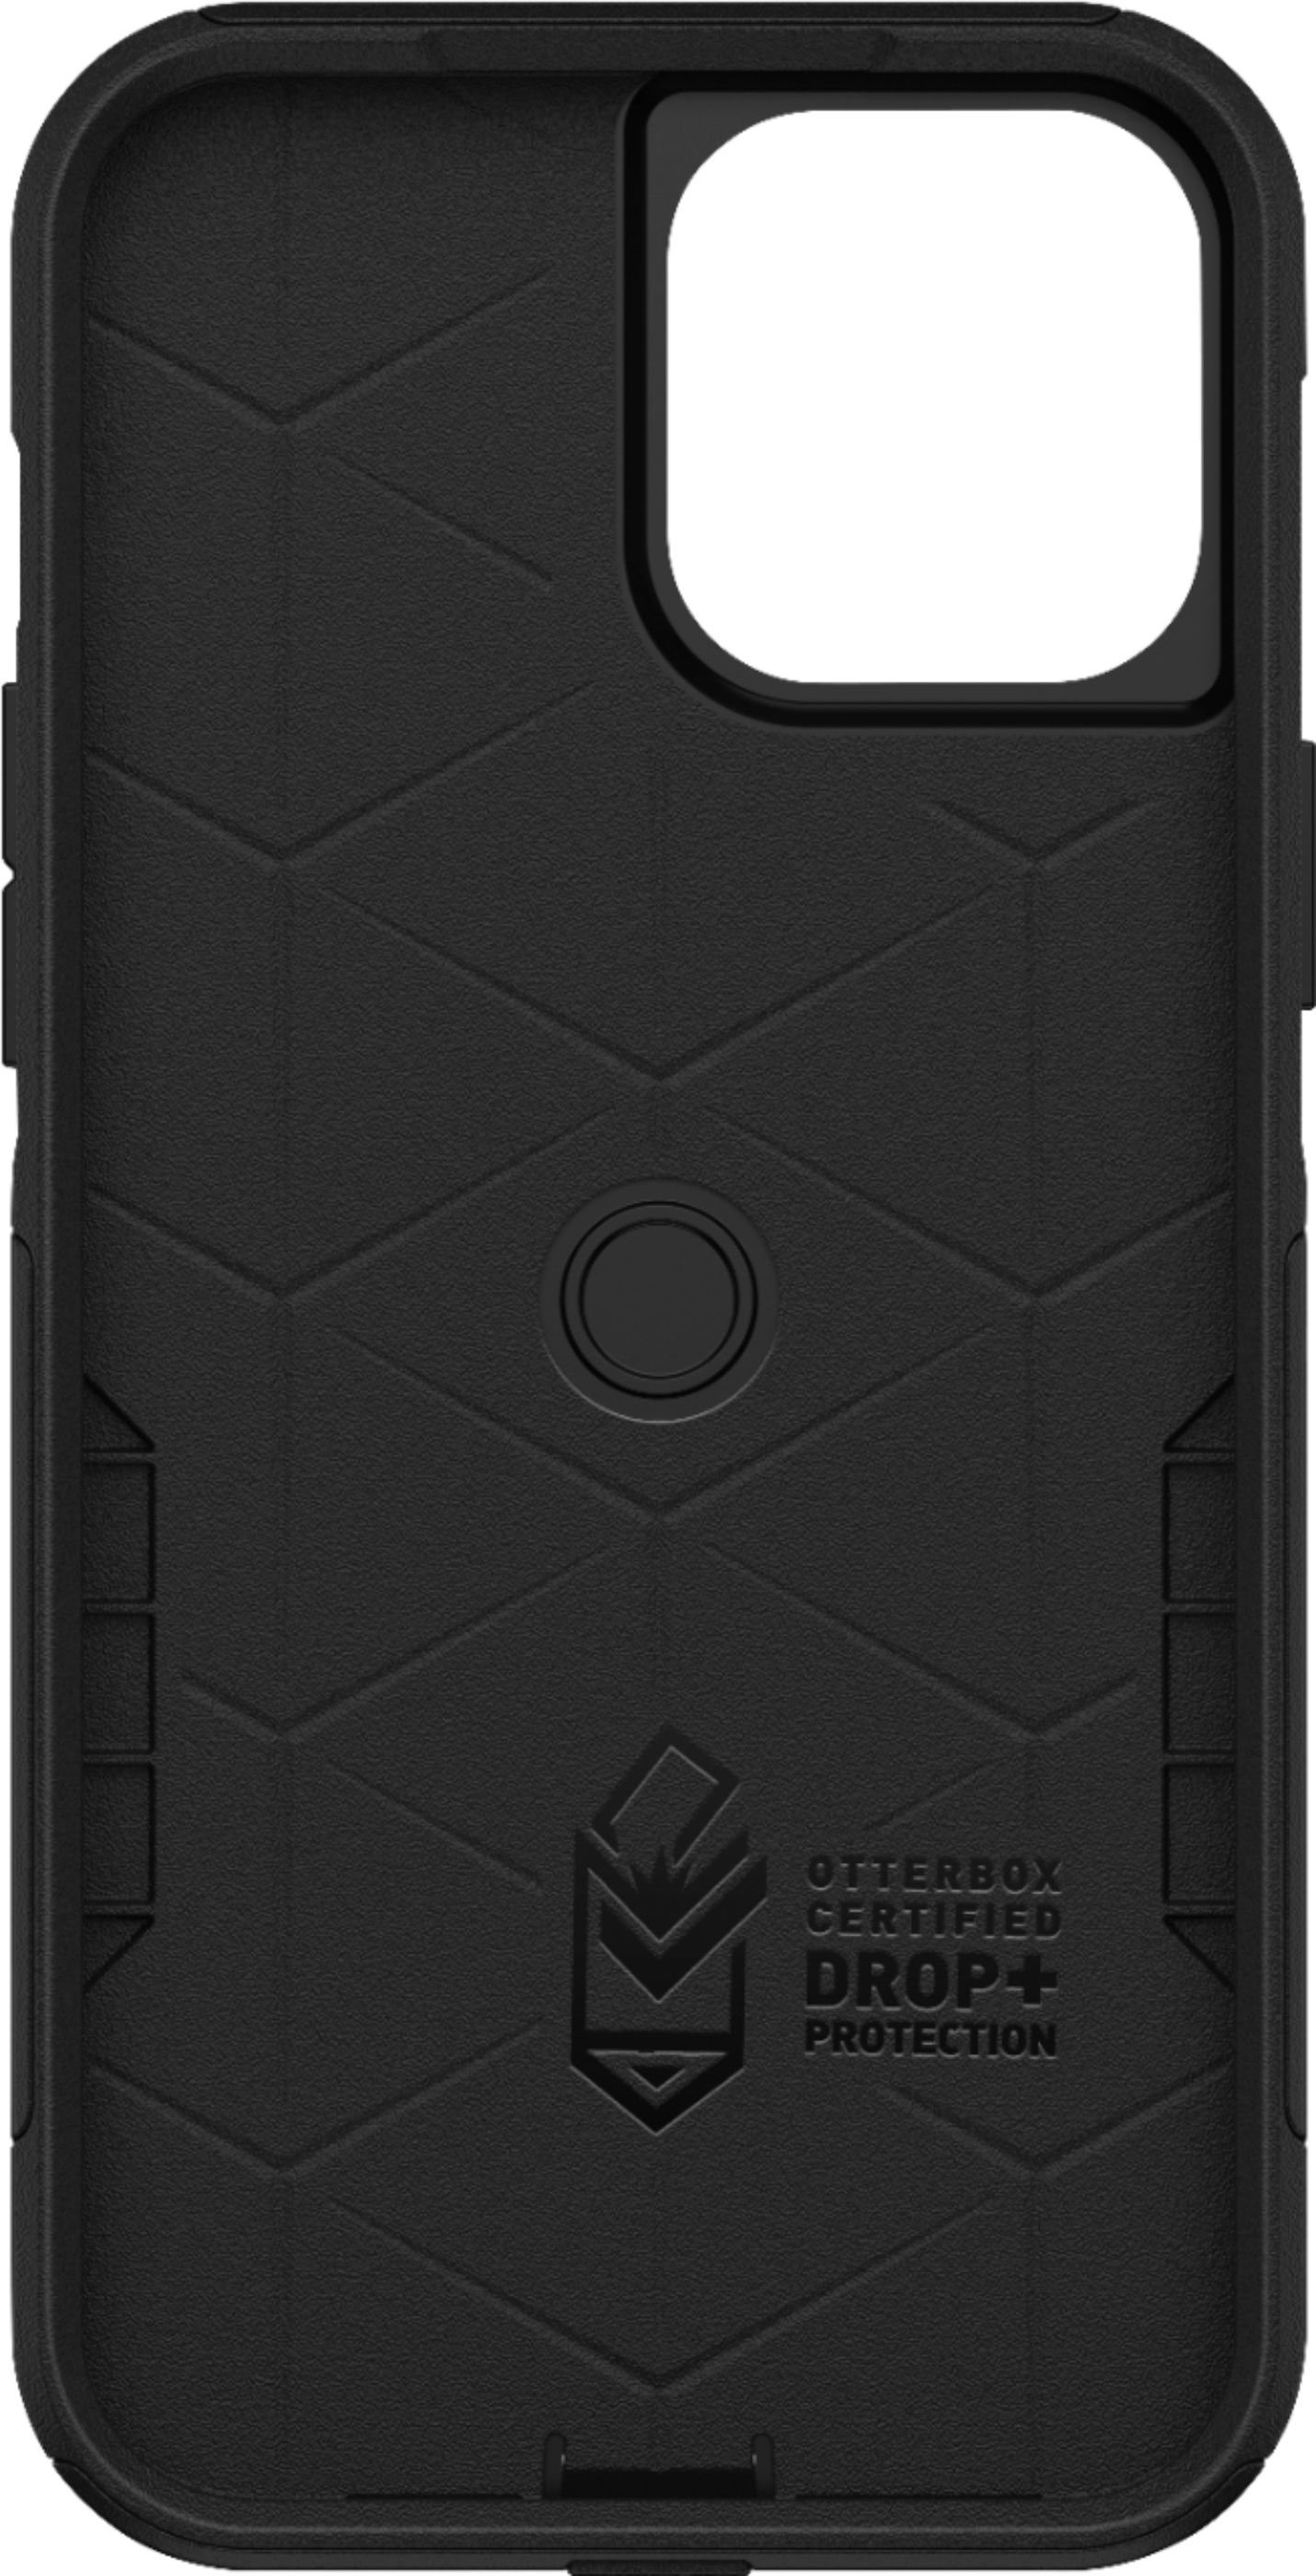 Otterbox Apple Iphone 13 Pro Max/iphone 12 Pro Max Commuter Case - Black :  Target